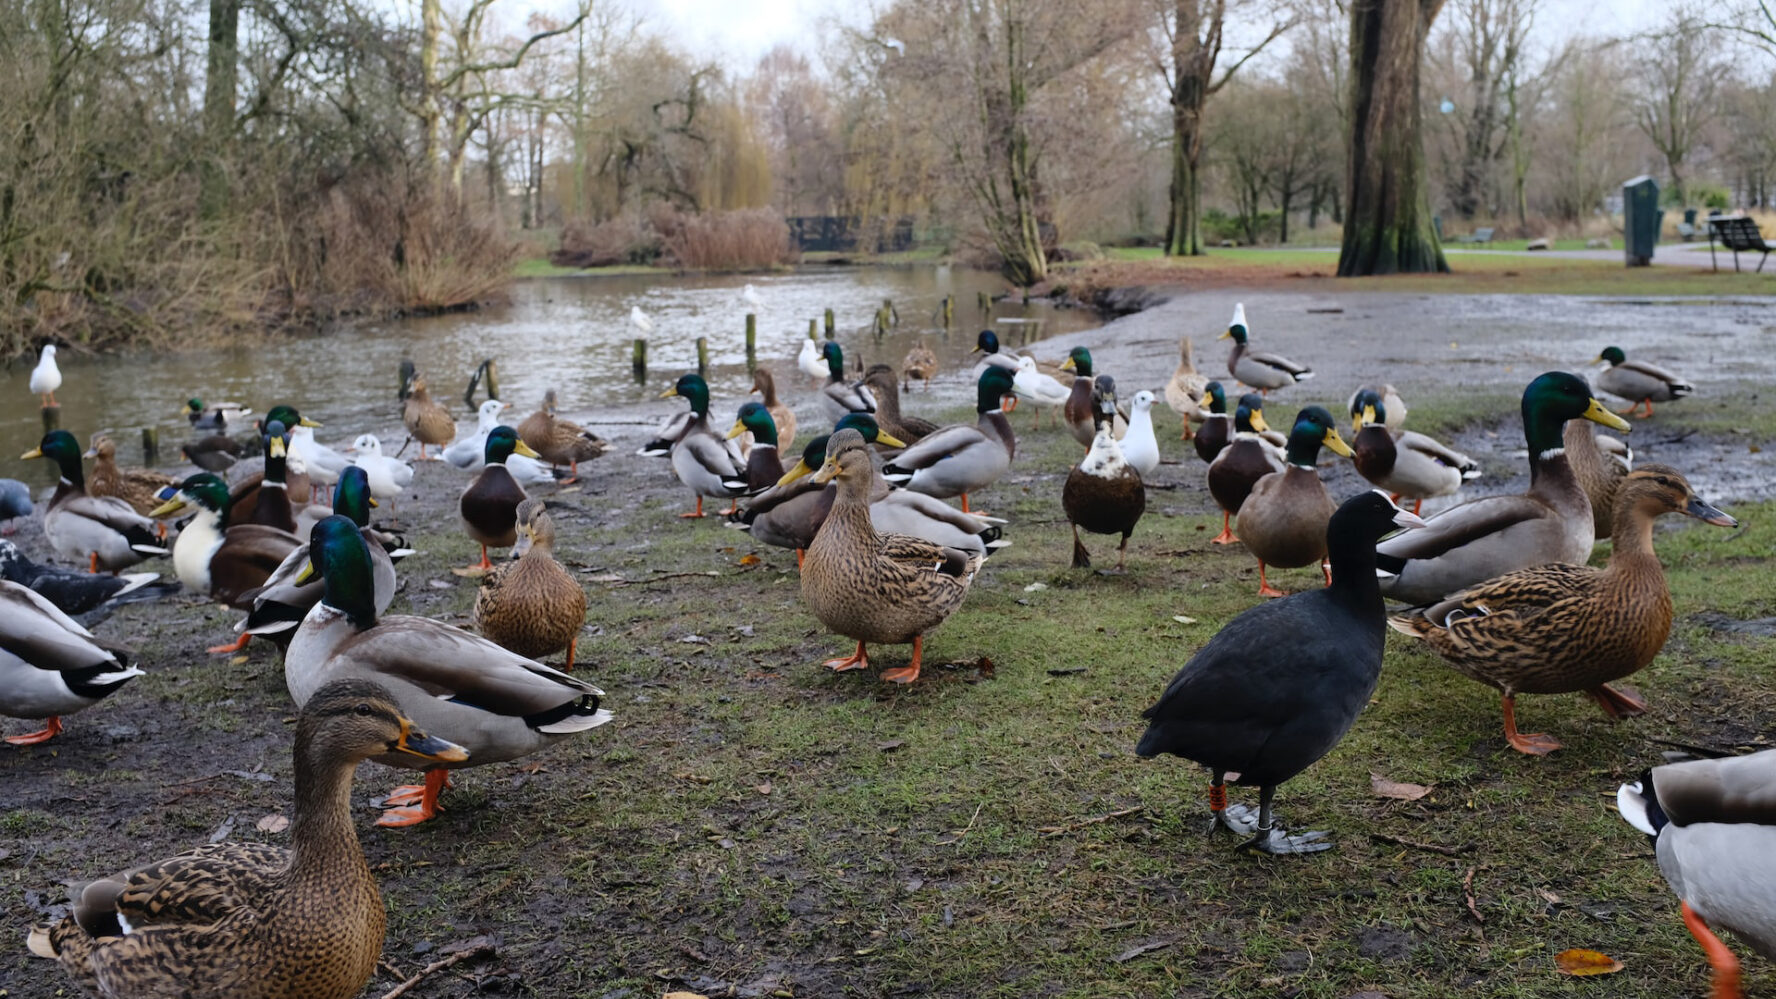 A muddy park, with waterfowl including ducks and coots standing in the foreground